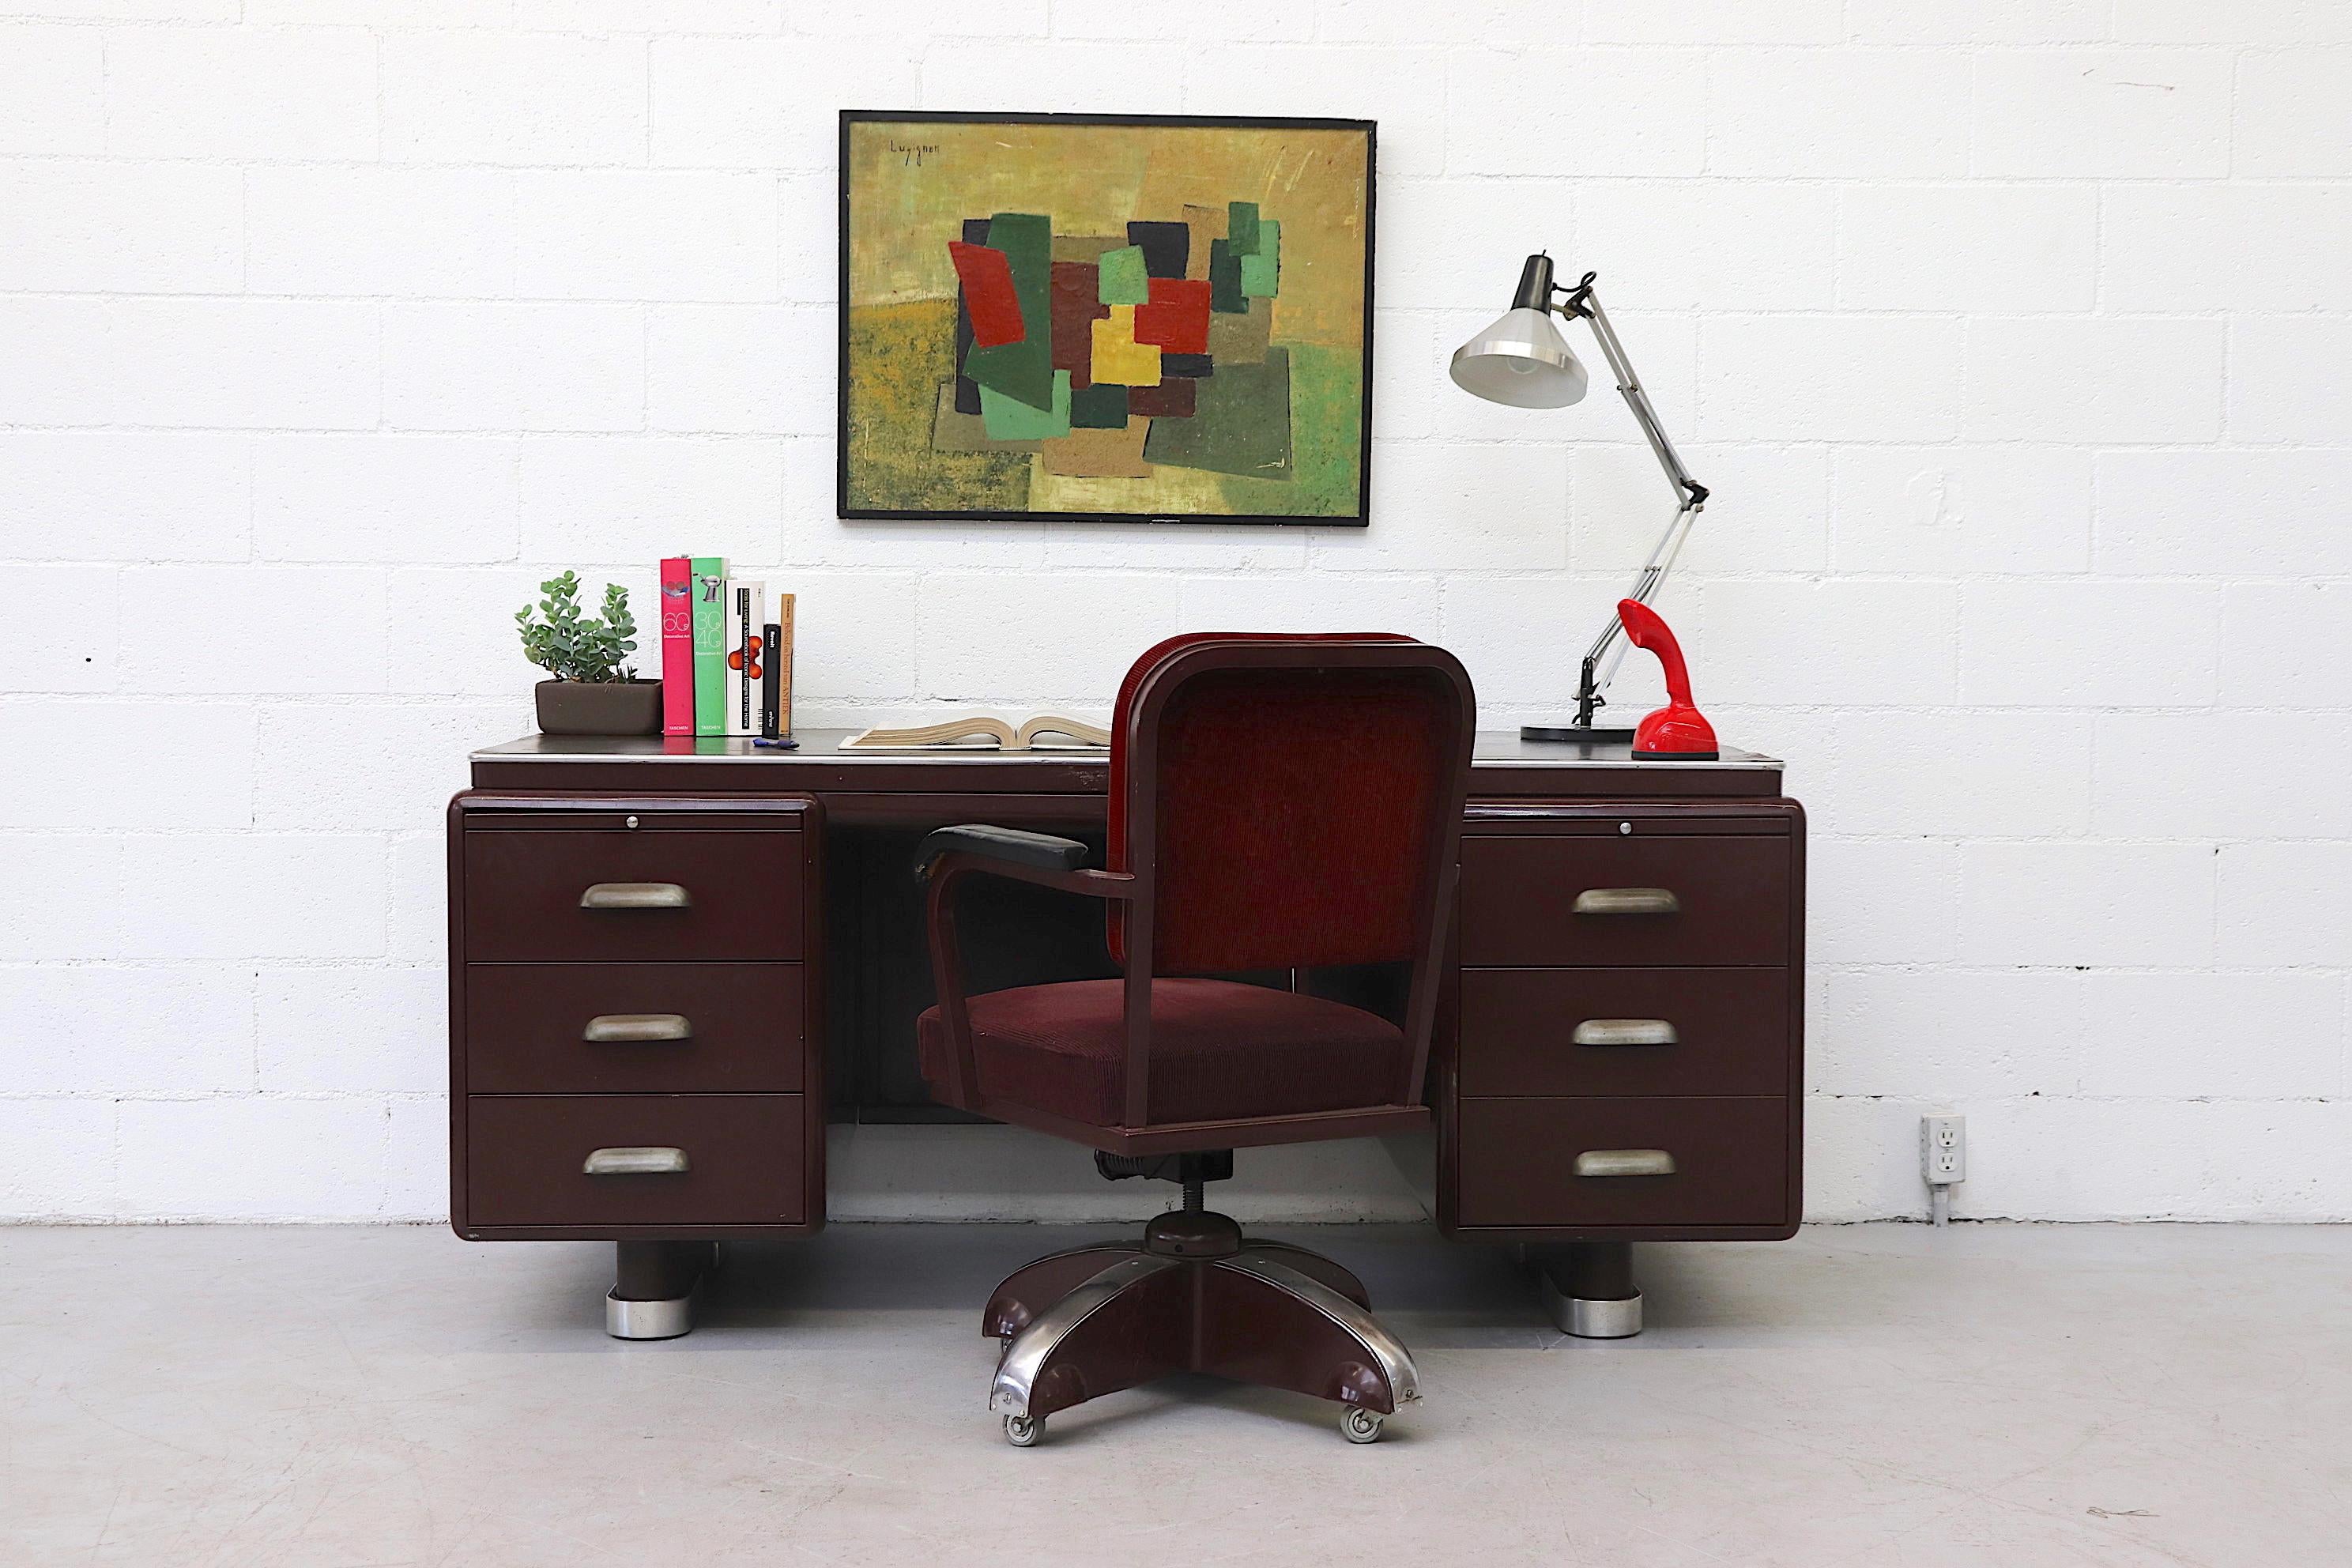 Rare handsome Ahrend ODA executive desk in very original condition with visible wear and some denting. Charcoal linoleum top with maroon enameled metal casing. This rare version has linear cupped metal drawer pulls and 2 pullout / pull-out work